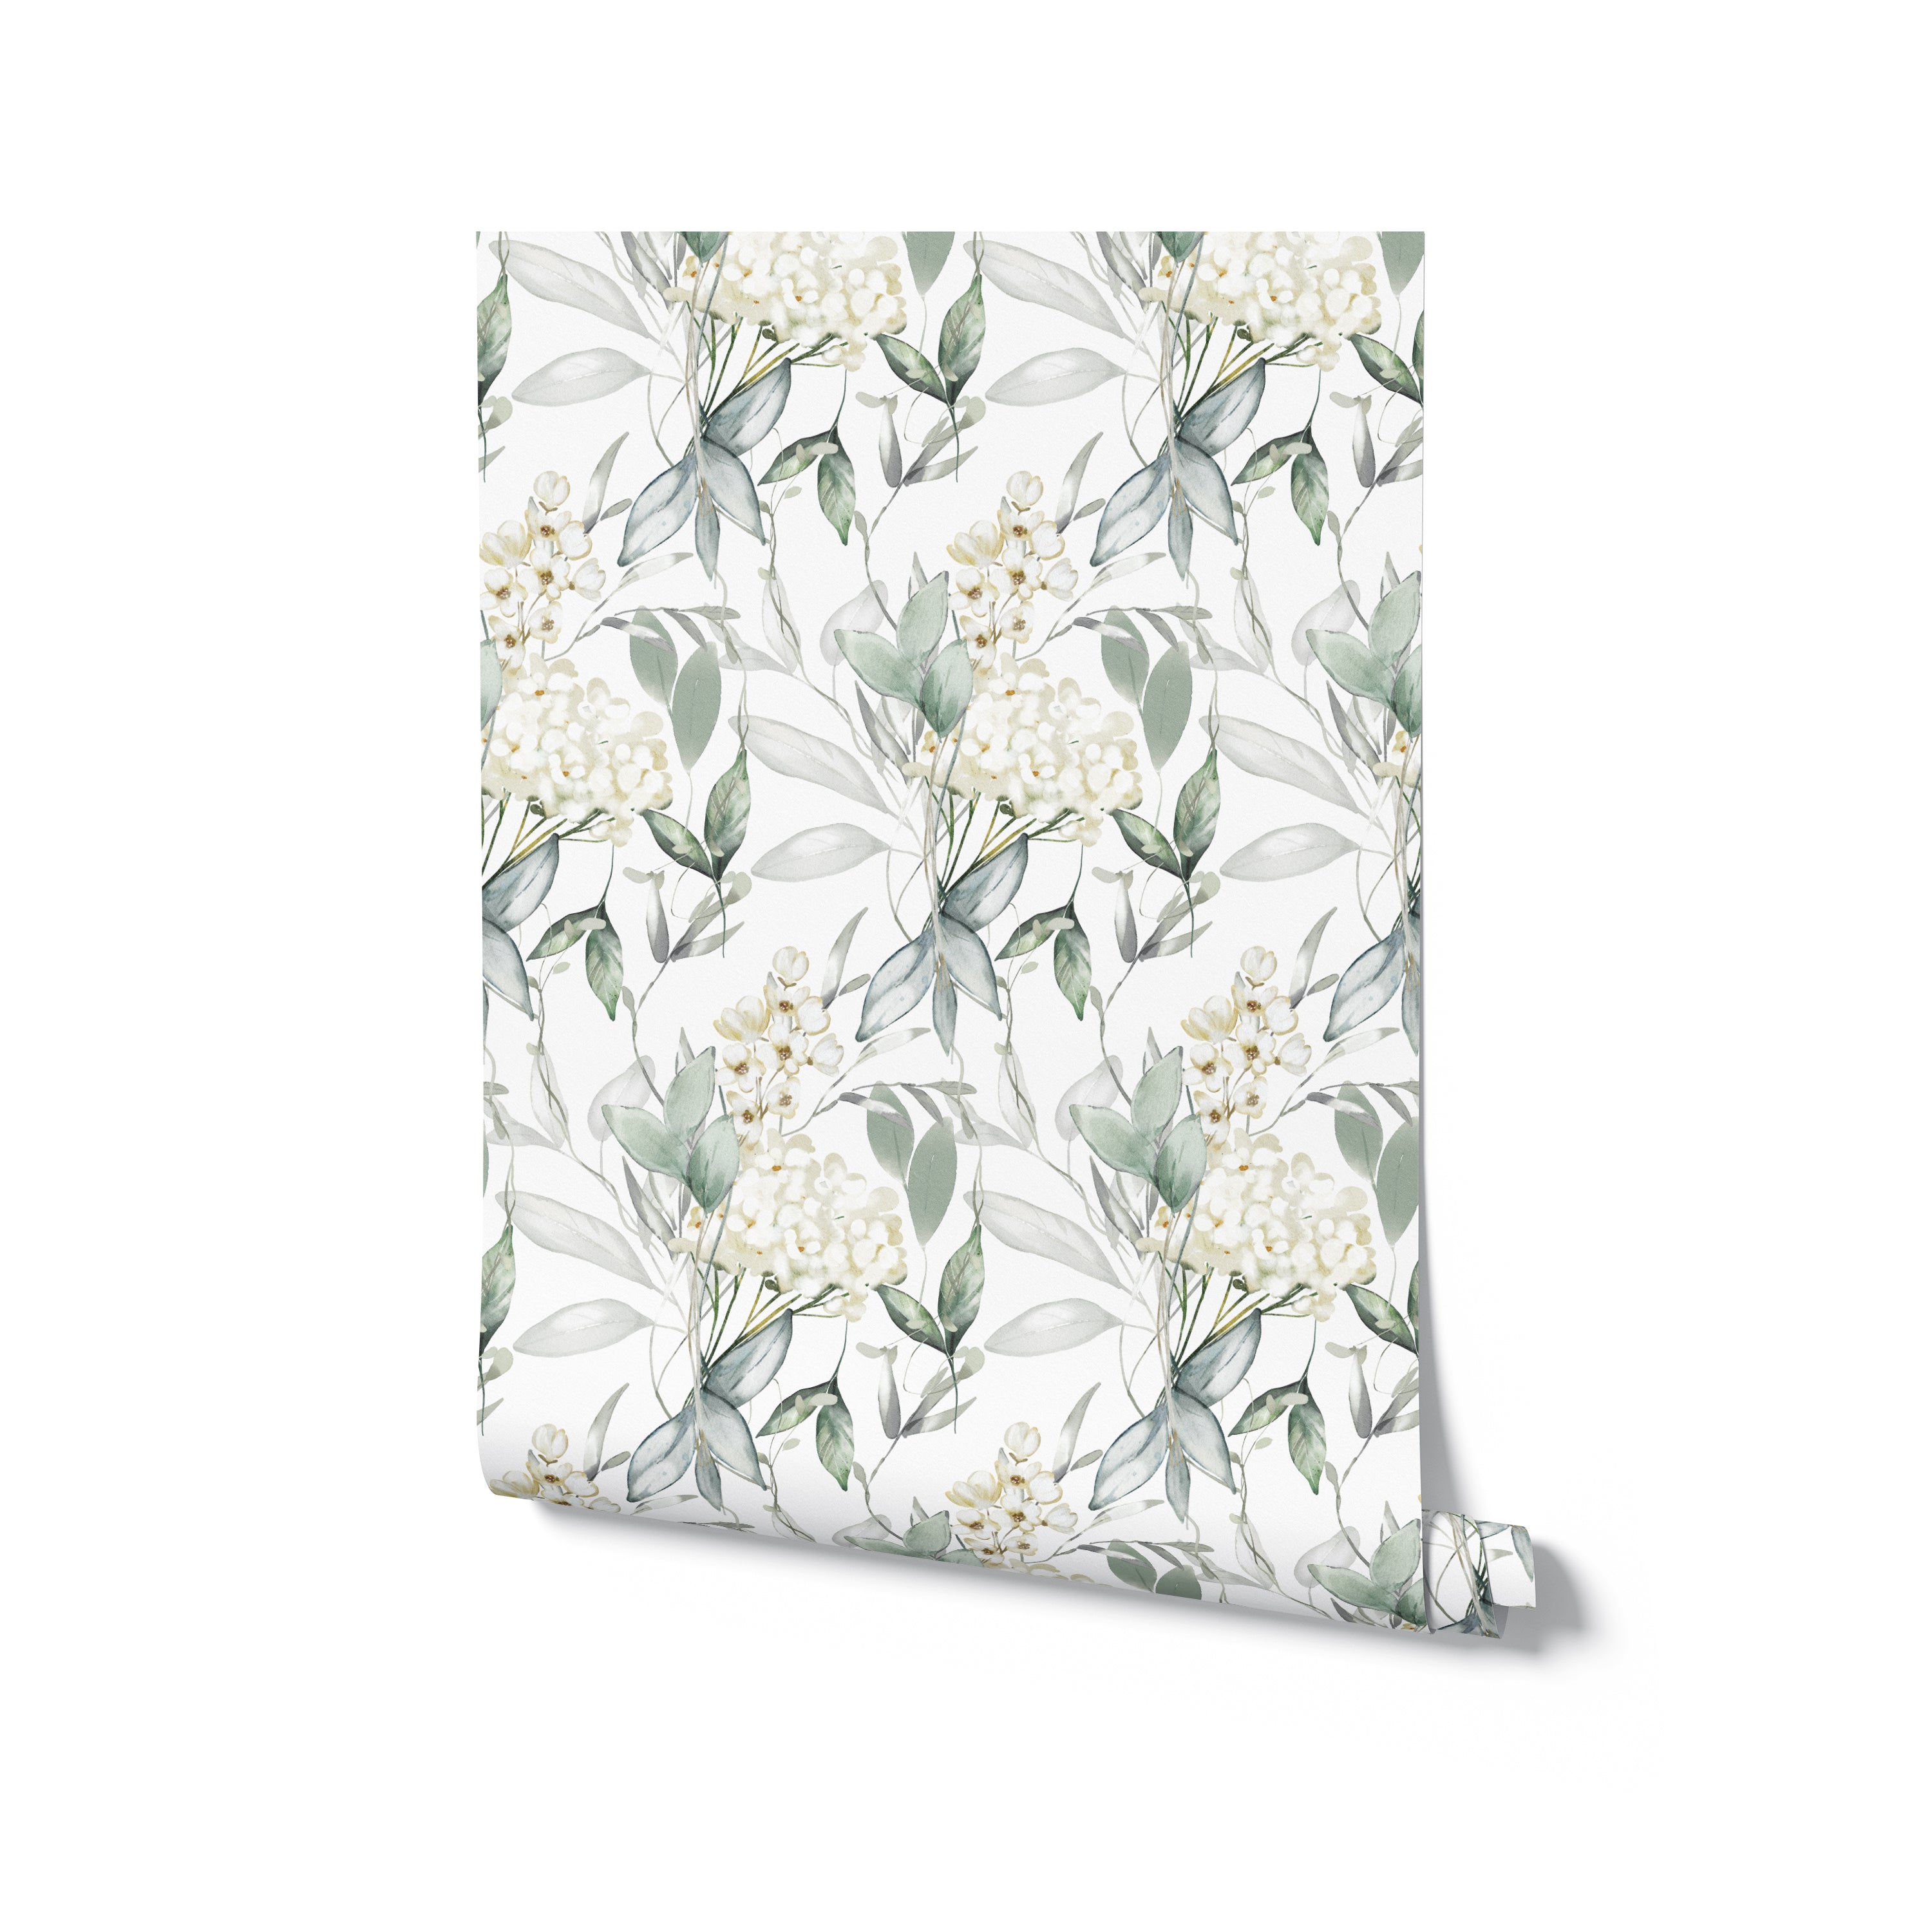 A roll of Heavenly Hydrangea wallpaper unrolled slightly to show the pattern. The wallpaper features an elegant design of white hydrangea flowers and soft green leaves, ideal for adding a touch of nature-inspired beauty to any space